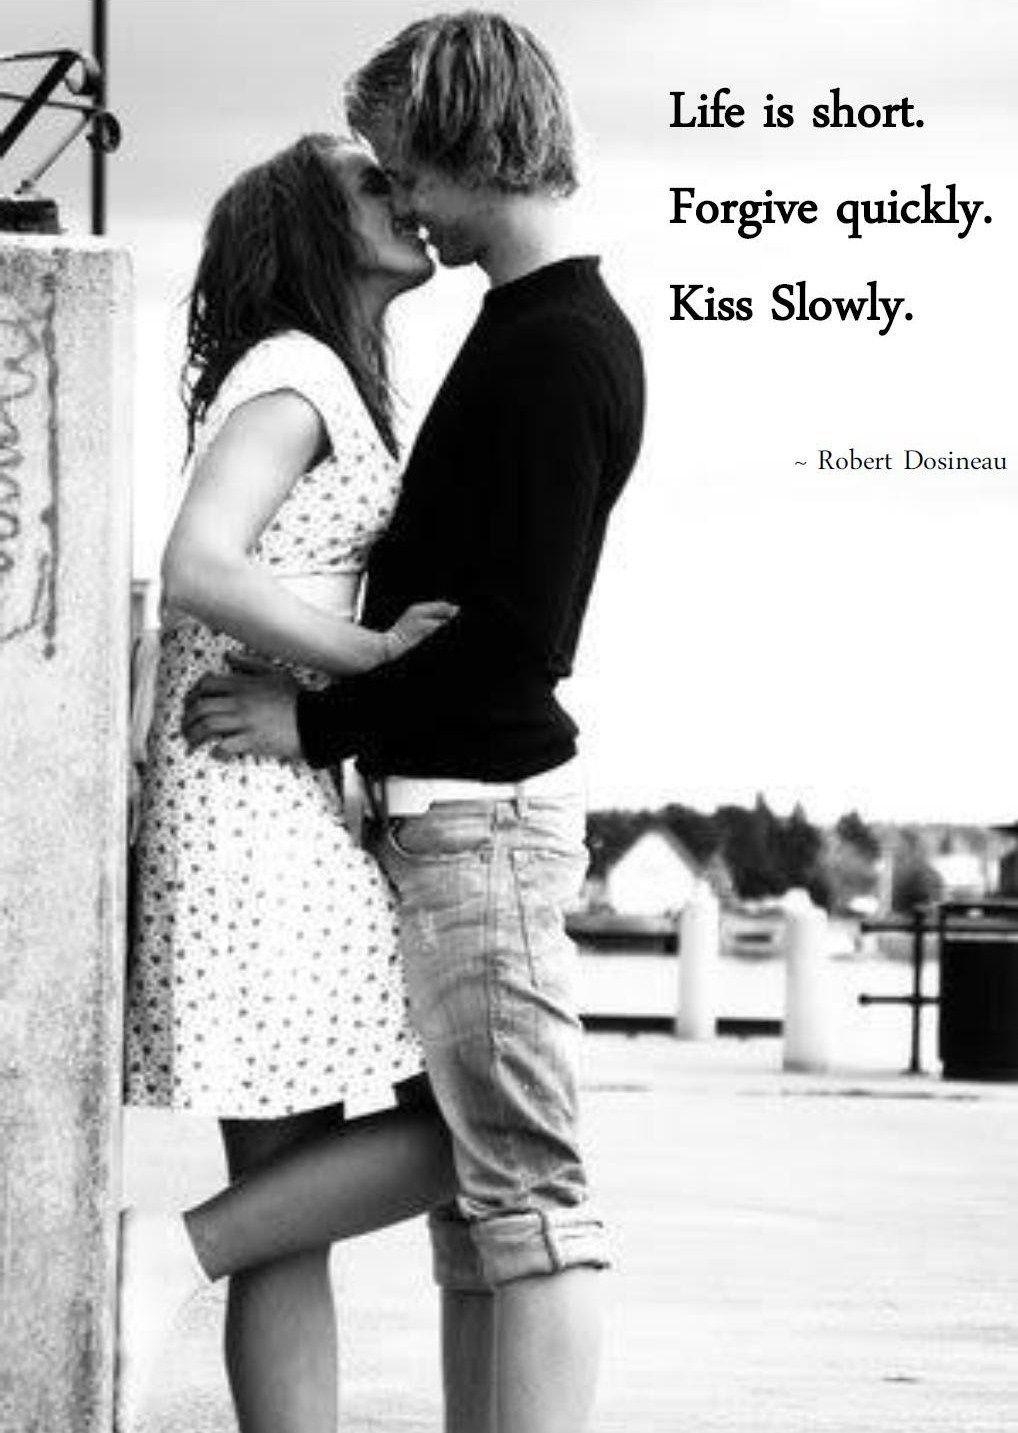 Best Kiss Quotes To Inspire You